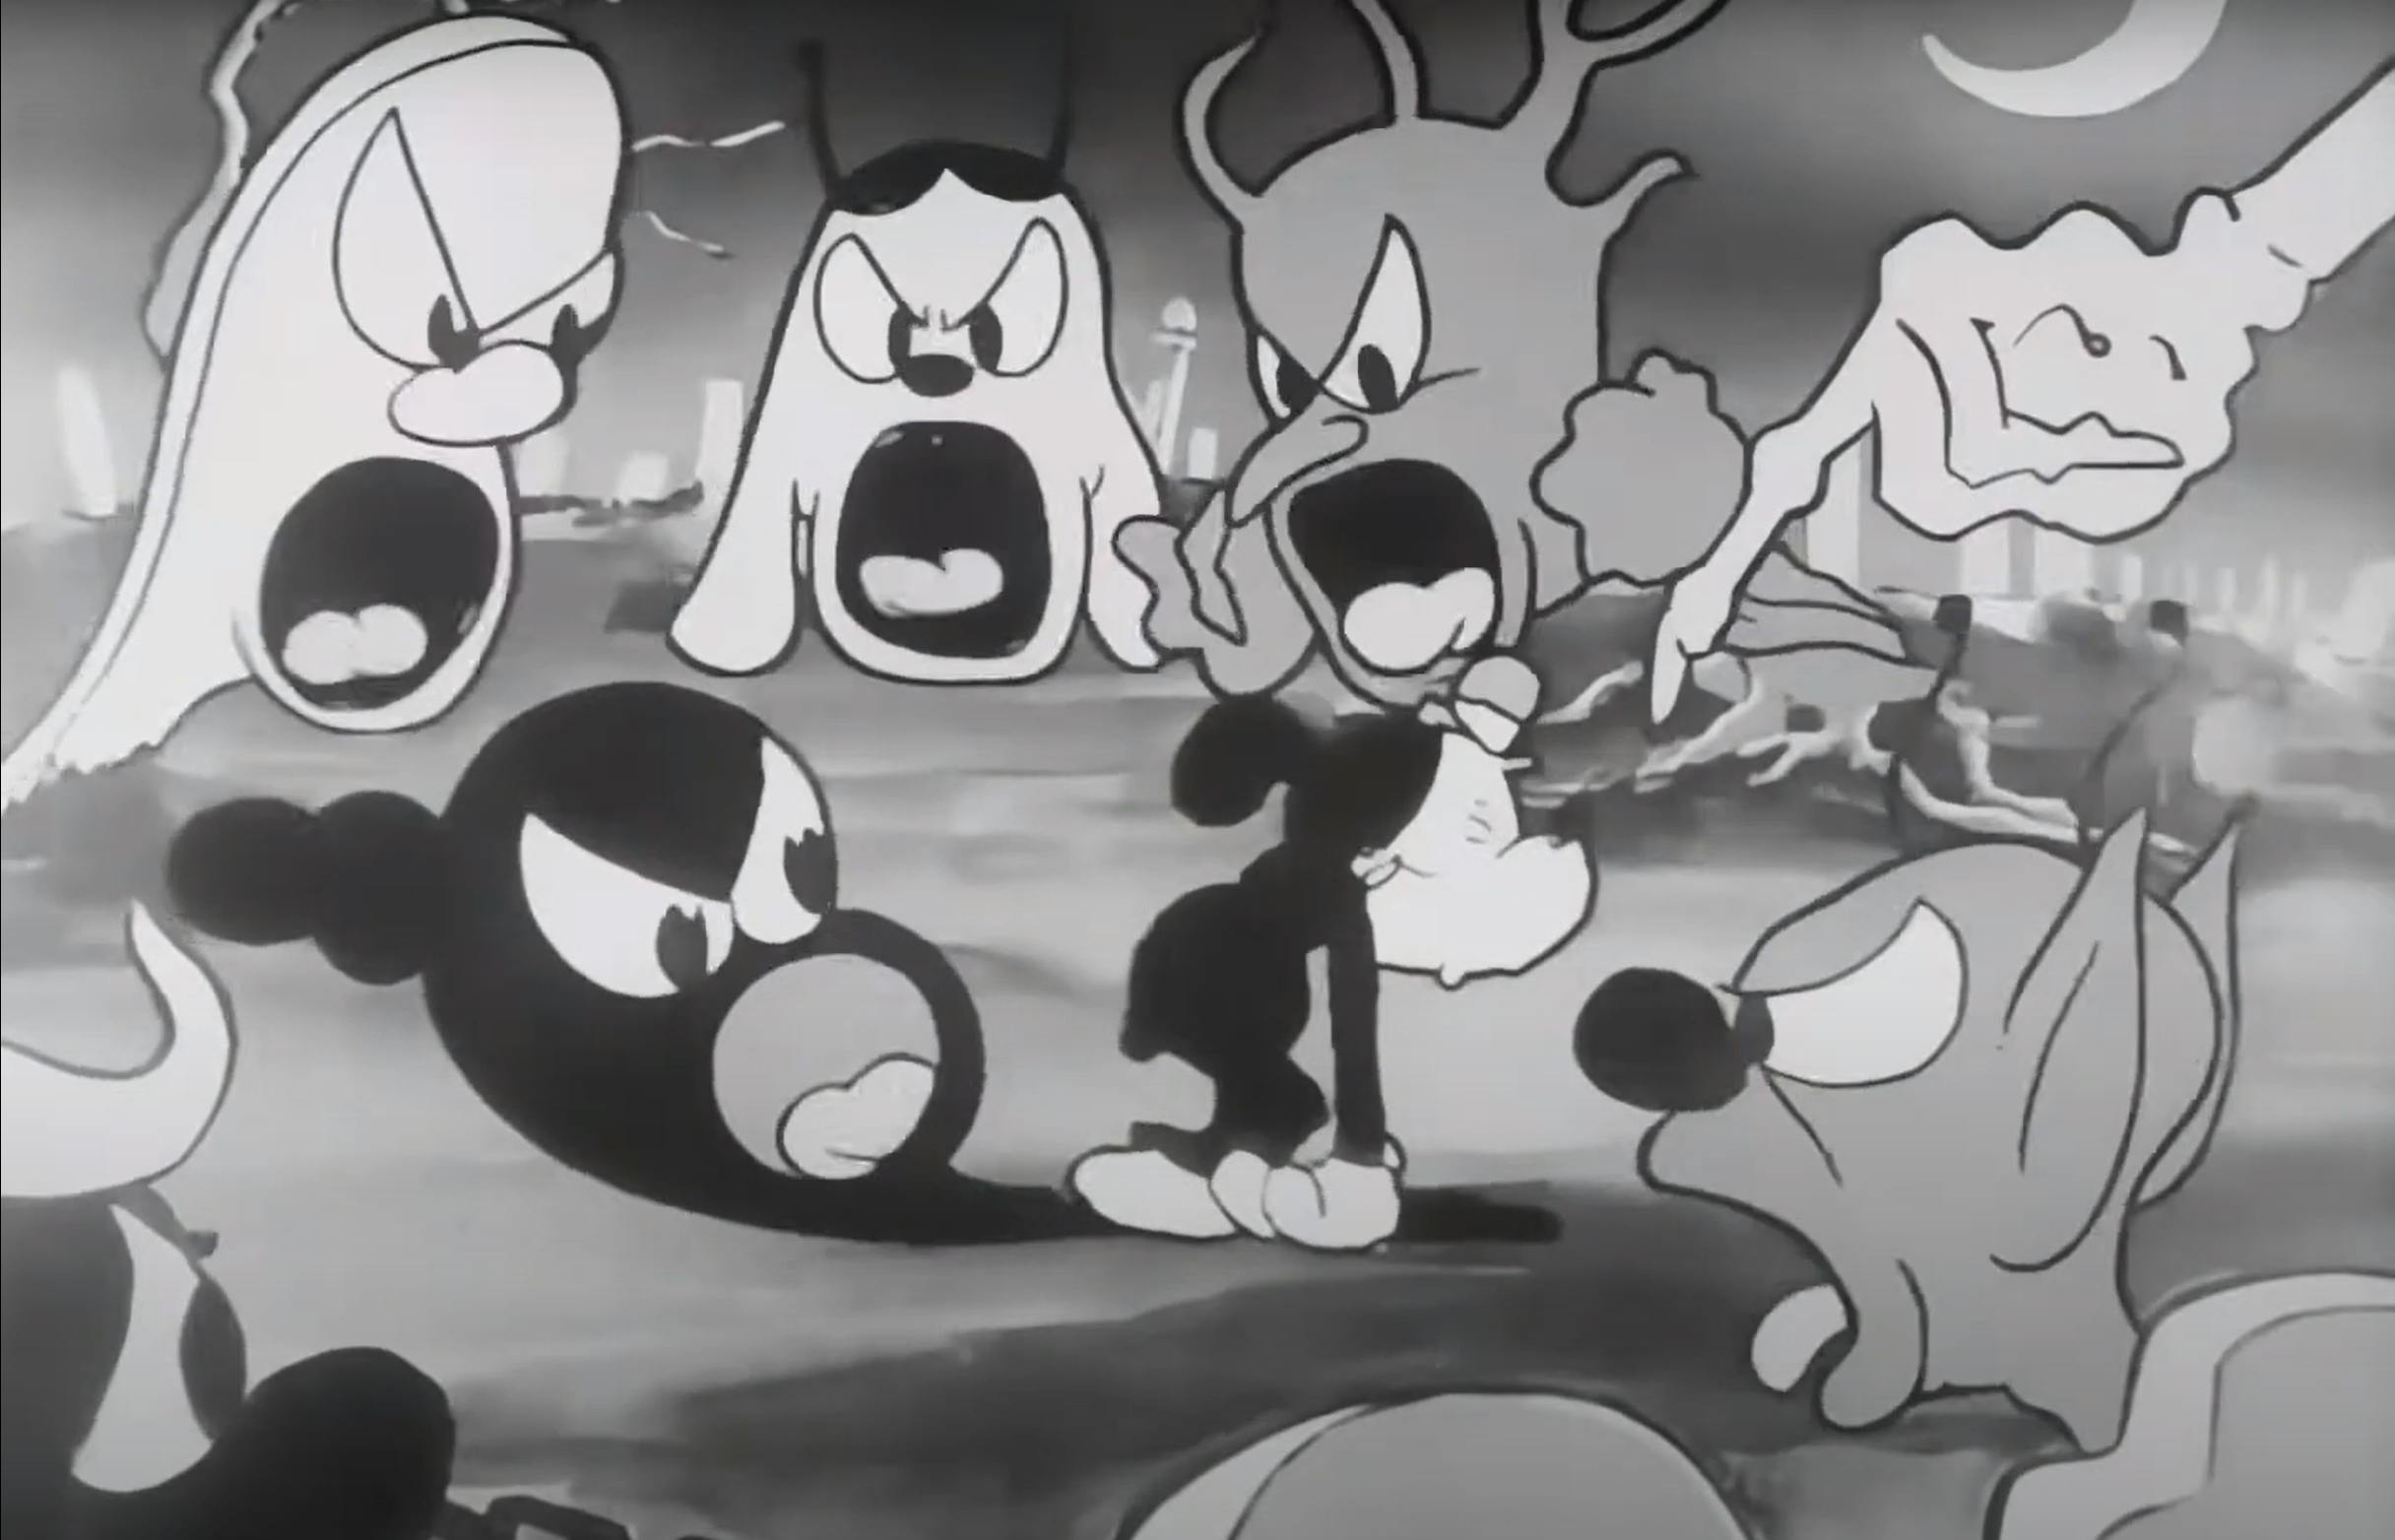 Screenshot from David Fleischer's Swing you Sinners (1930). Black and white classic animation, showcasing Bimbo a black dog, in the middle of the frame while a variety of ghost and ghouls yell and point at him 